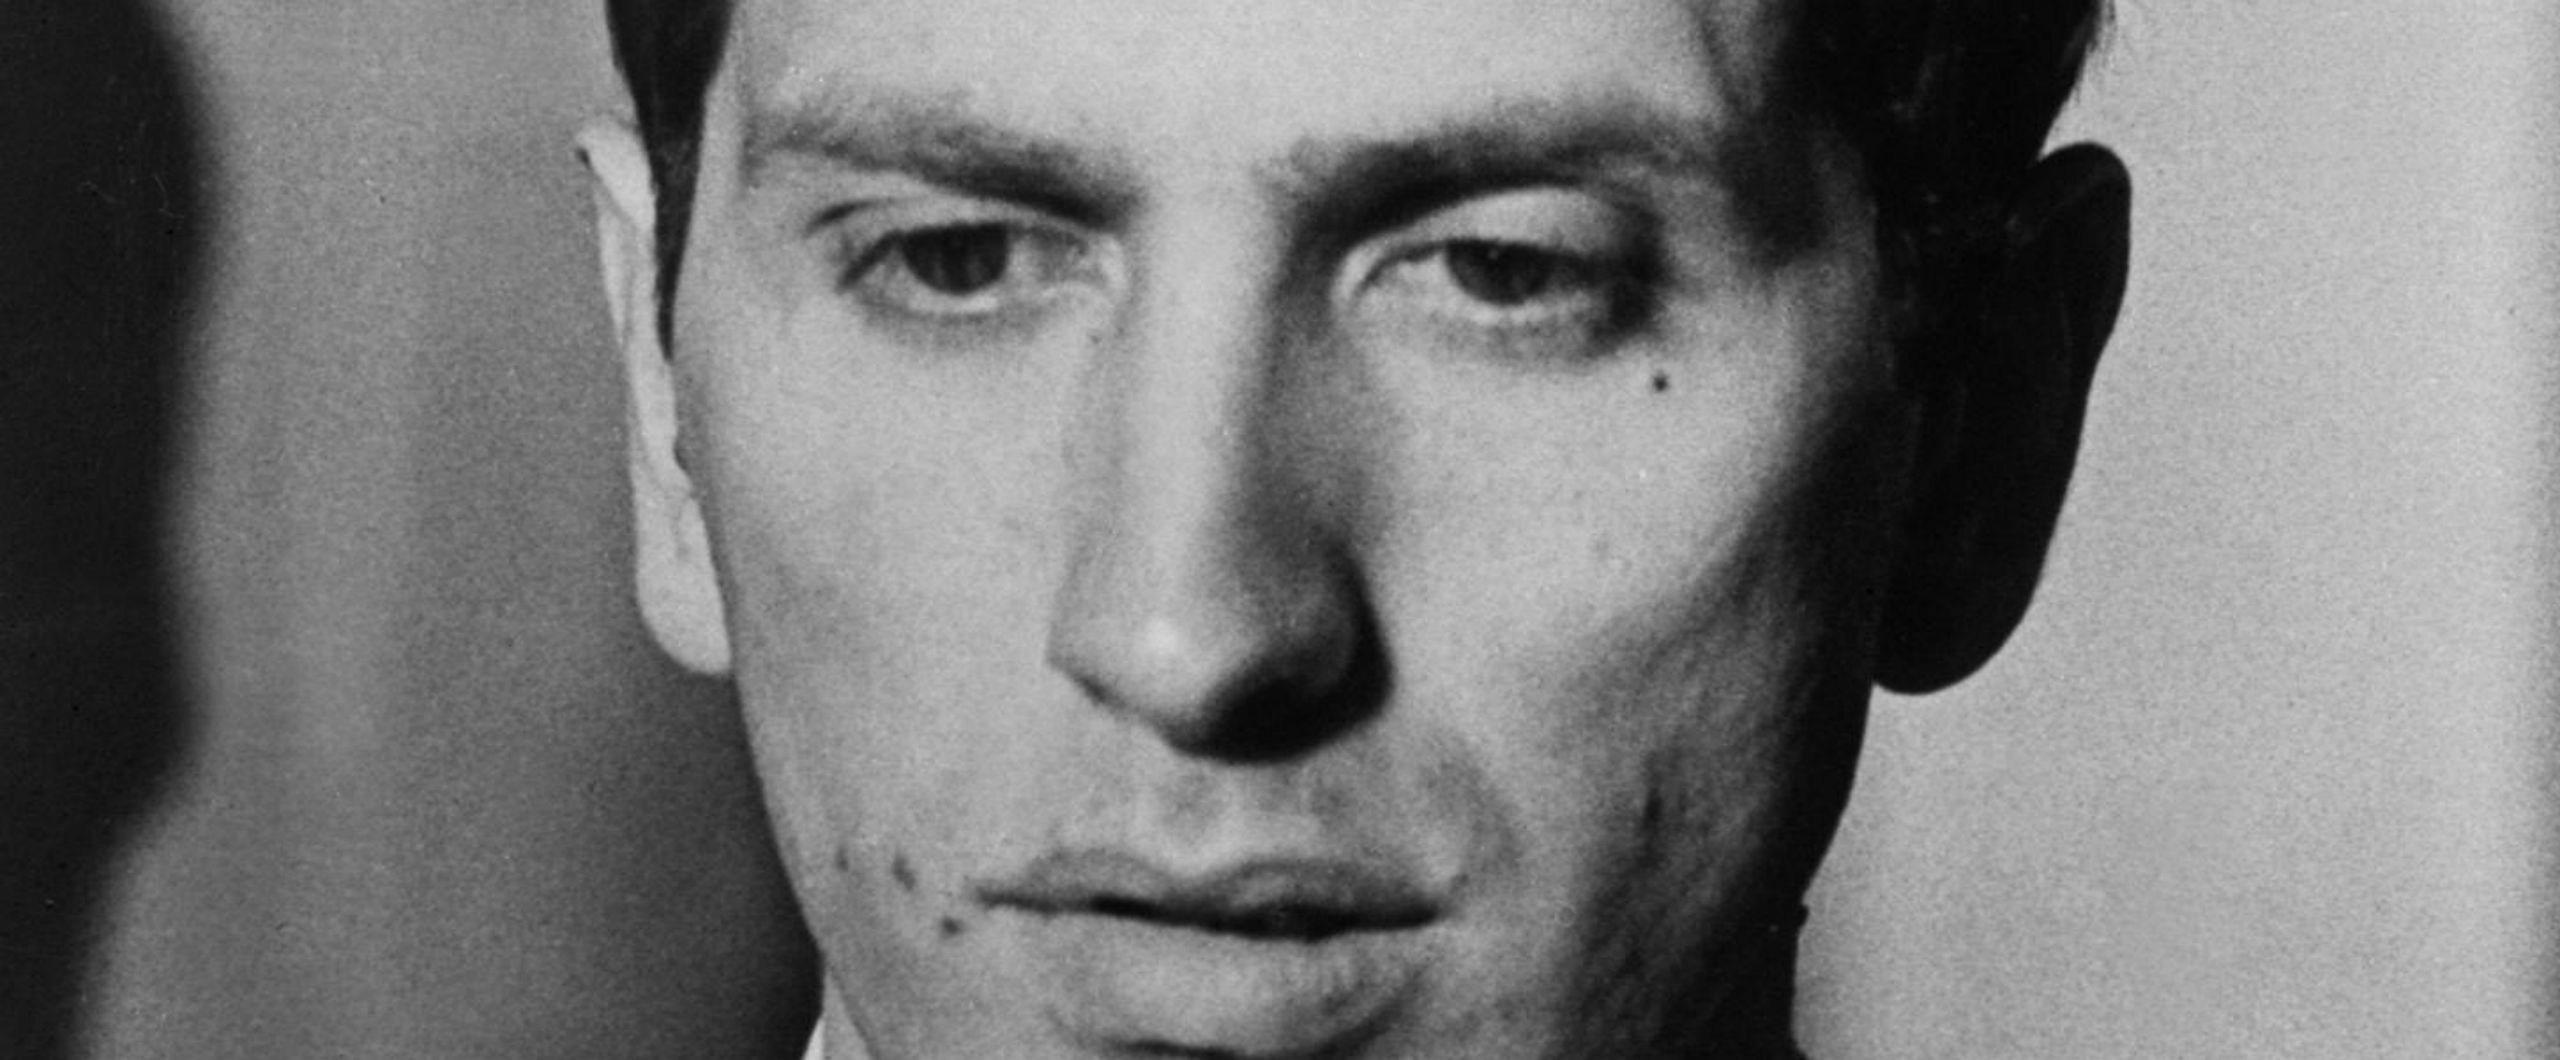 Black & White: The Rise and Fall of Bobby Fischer